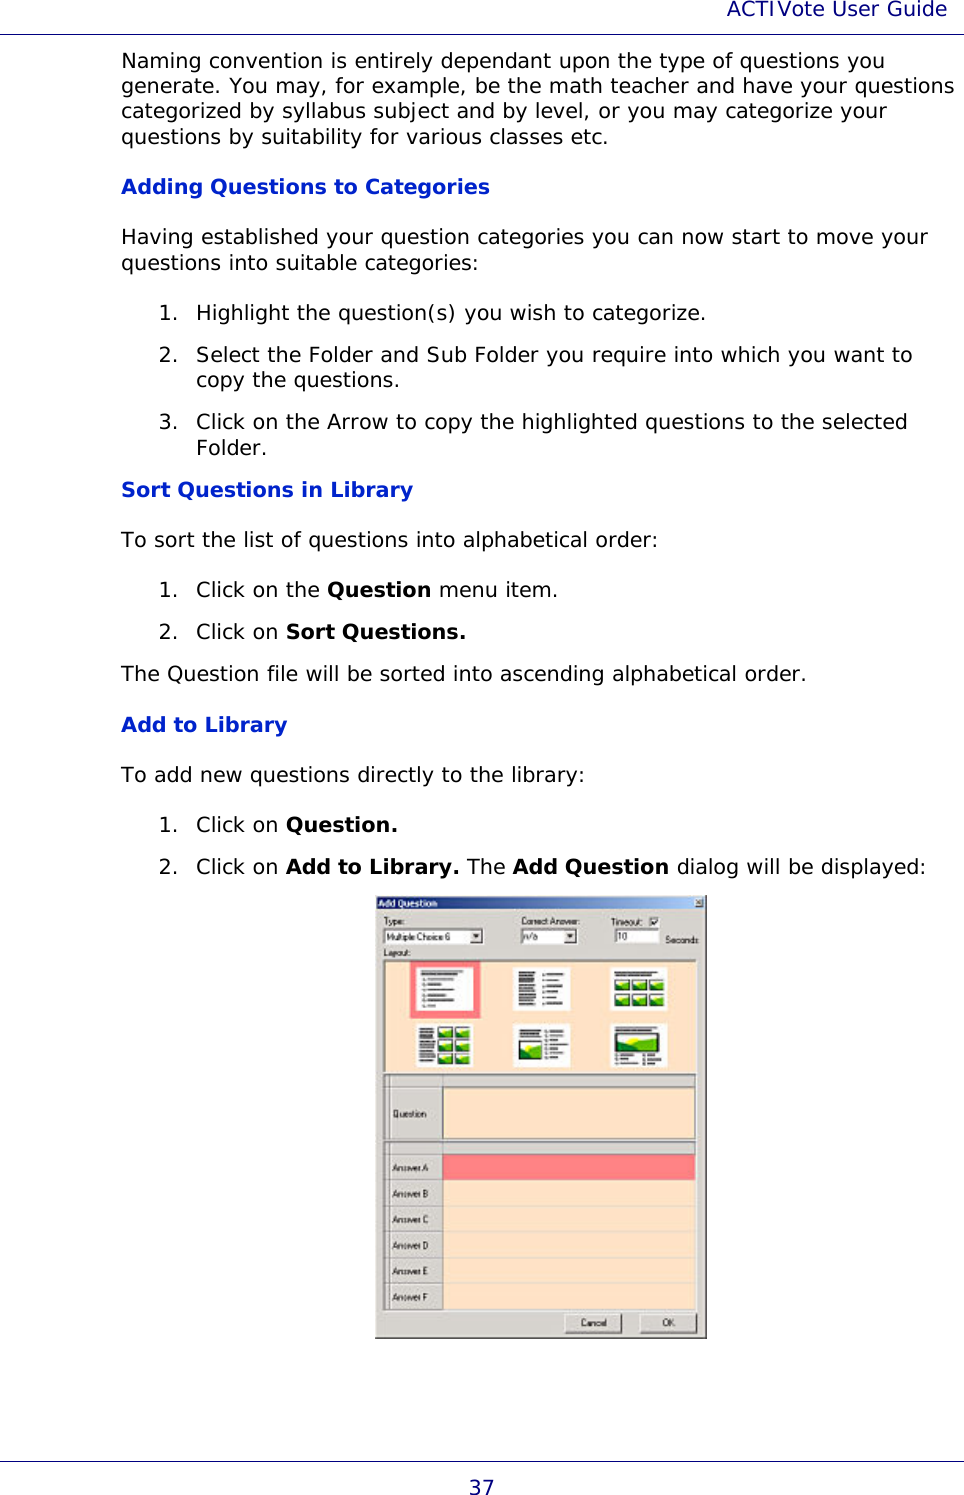 ACTIVote User Guide 37 Naming convention is entirely dependant upon the type of questions you generate. You may, for example, be the math teacher and have your questions categorized by syllabus subject and by level, or you may categorize your questions by suitability for various classes etc. Adding Questions to Categories Having established your question categories you can now start to move your questions into suitable categories: 1. Highlight the question(s) you wish to categorize. 2. Select the Folder and Sub Folder you require into which you want to copy the questions. 3. Click on the Arrow to copy the highlighted questions to the selected Folder.  Sort Questions in Library To sort the list of questions into alphabetical order: 1. Click on the Question menu item. 2. Click on Sort Questions. The Question file will be sorted into ascending alphabetical order.  Add to Library To add new questions directly to the library: 1. Click on Question. 2. Click on Add to Library. The Add Question dialog will be displayed:  